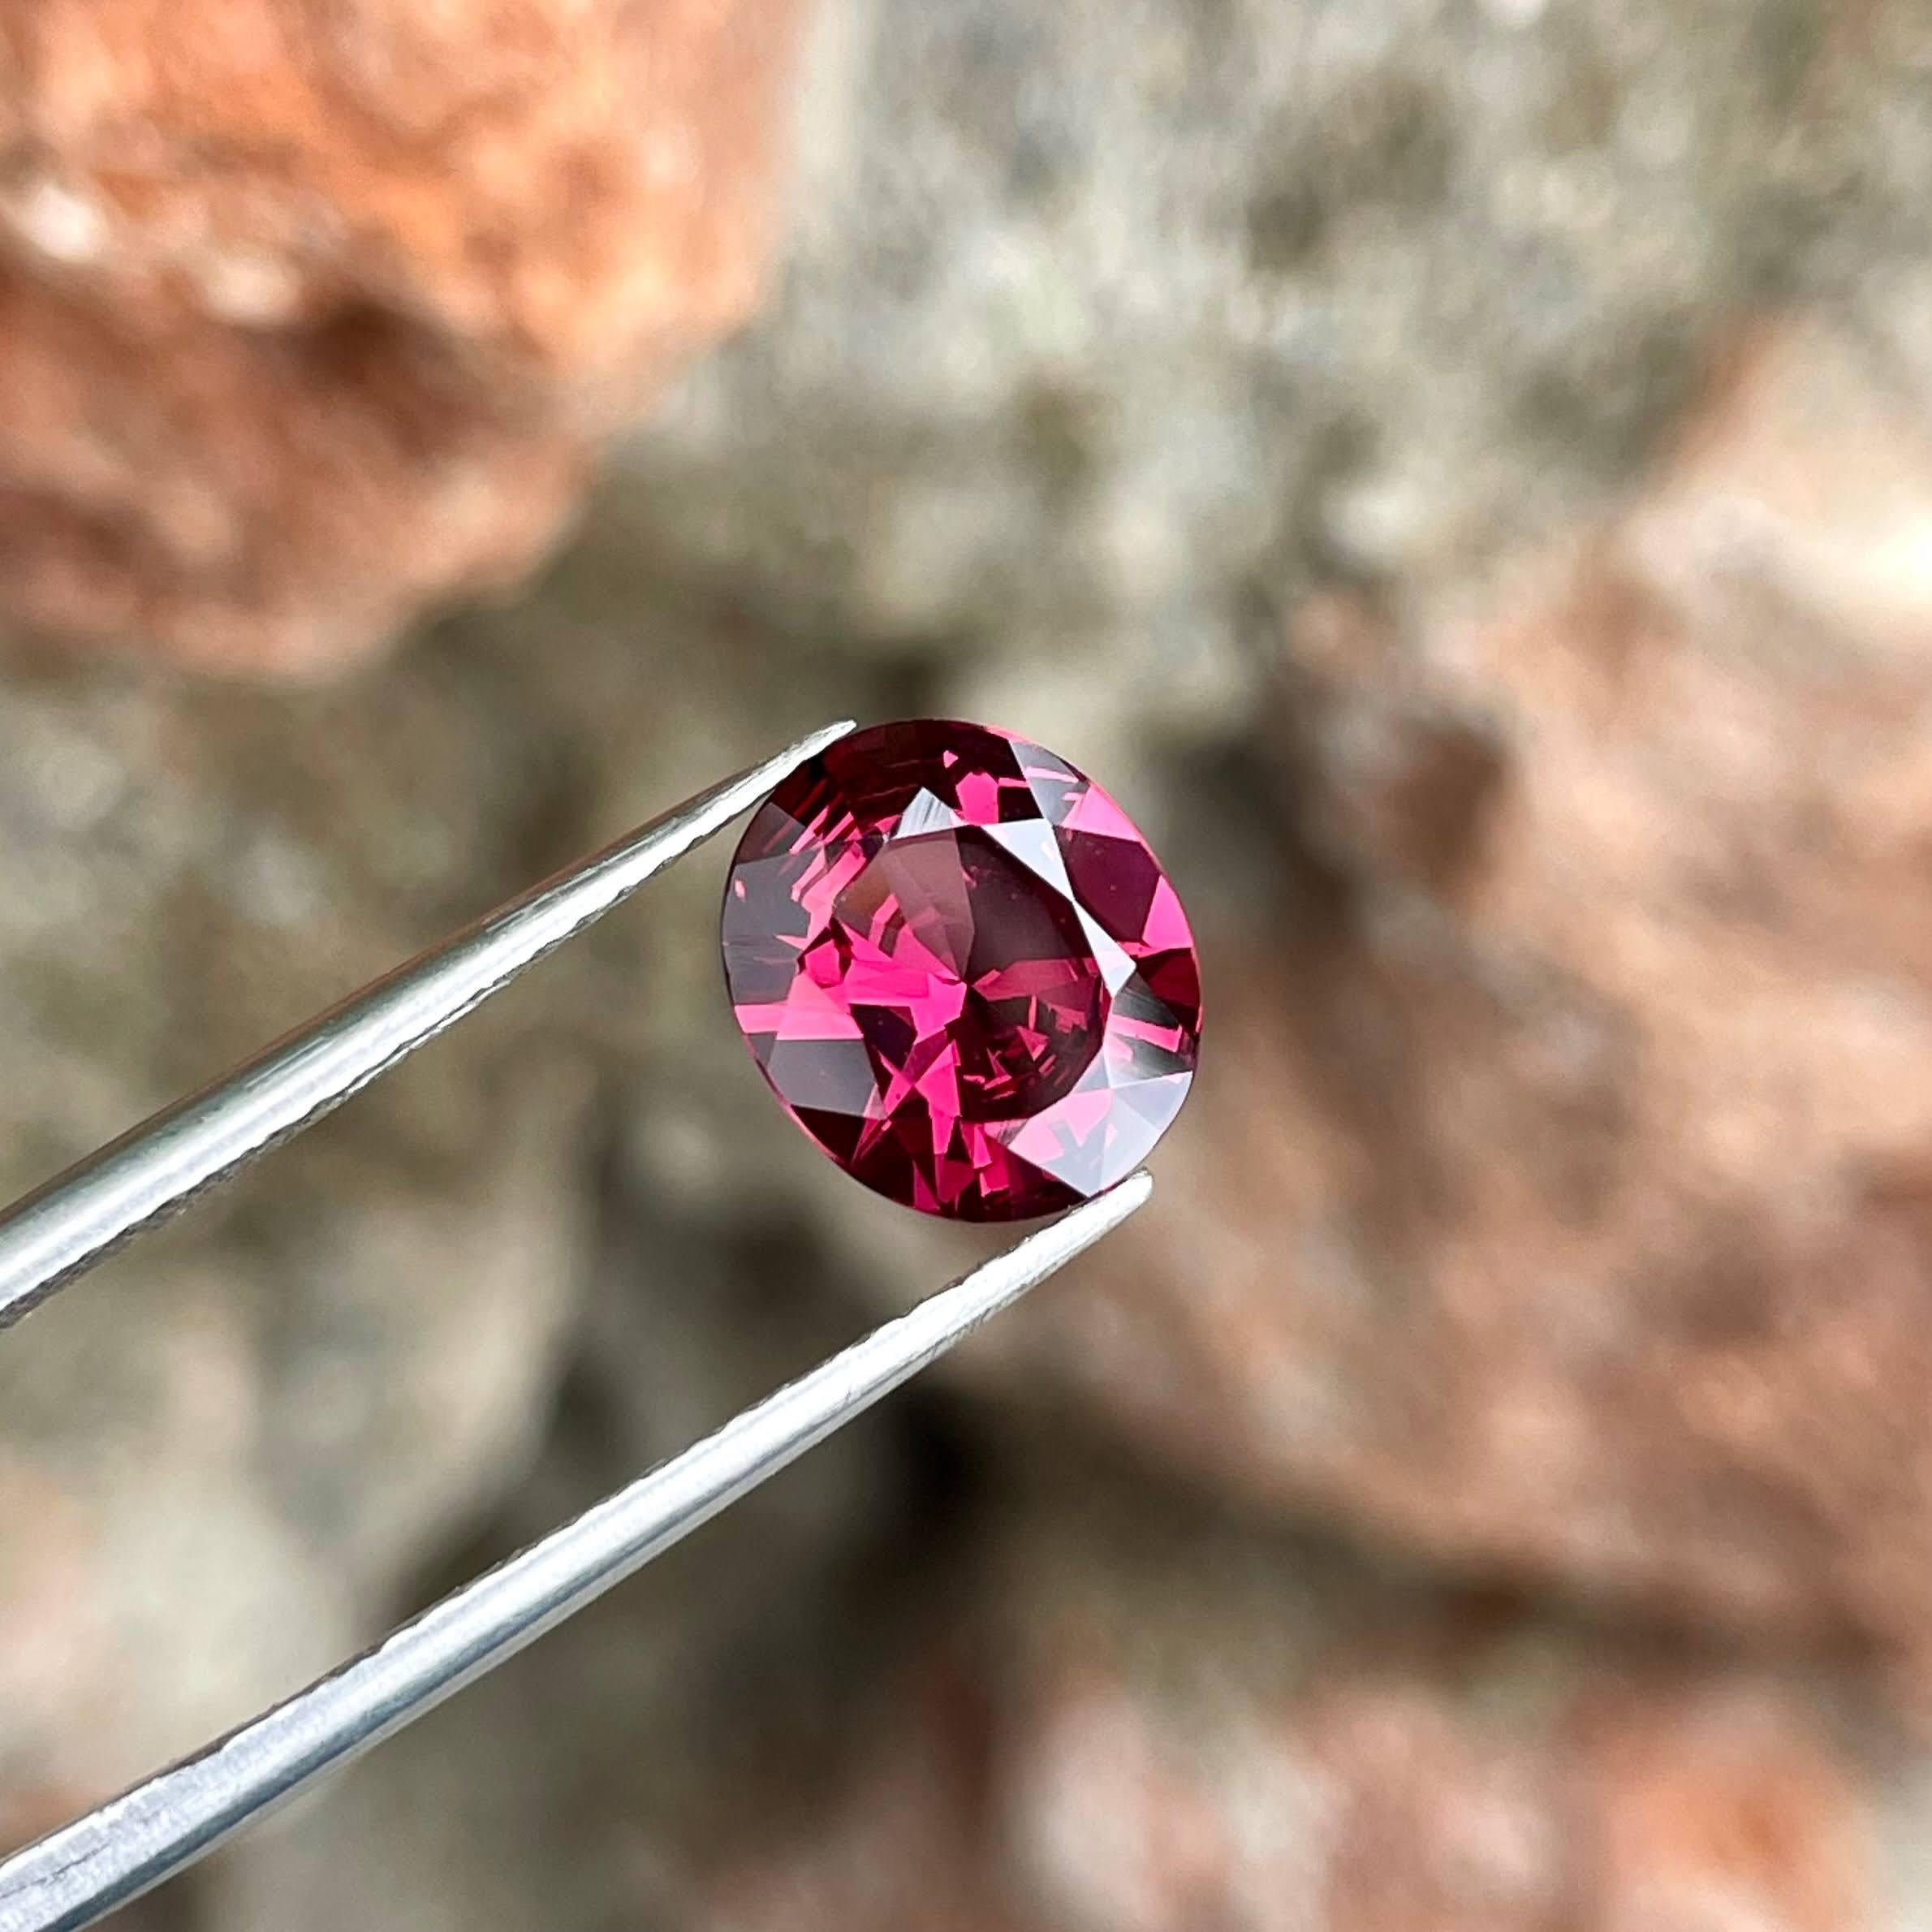 Weight 2.35 carats 
Dimensions 9.1x7.9x4.5 mm
Treatment none 
Origin Madagascar 
Clarity eye clean 
Shape oval 
Cut custom precision 




gemstone showcases a delightful blend of reddish-pink hues that evoke a sense of warmth and vibrancy. Renowned